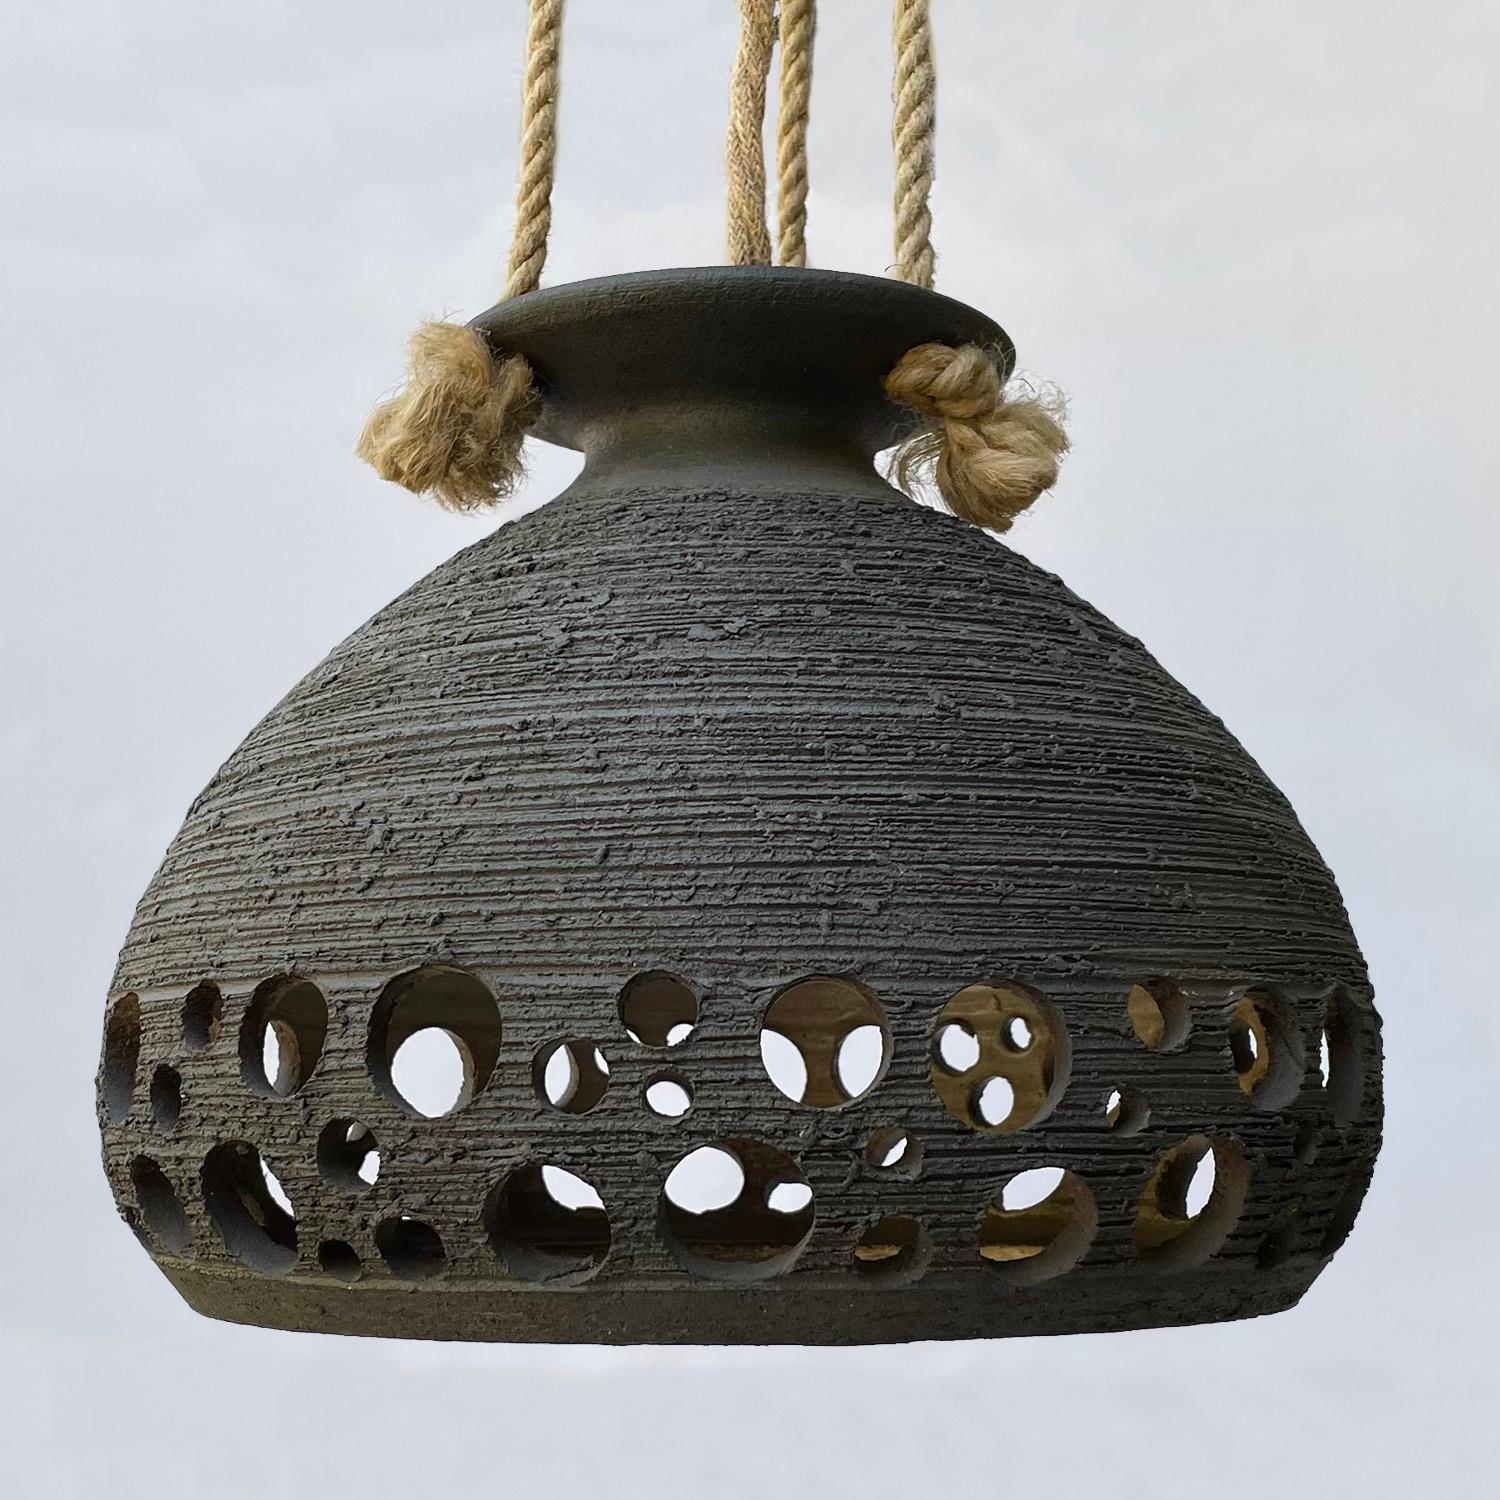 Scandinavian ceramic rope pendant light
Sweden, 1970s
Textured ceramic globe and canopy are the most beautiful shade of blue gray
Newly rewired with jute covered wiring to match the original rope detail
Single socket medium base
This is a